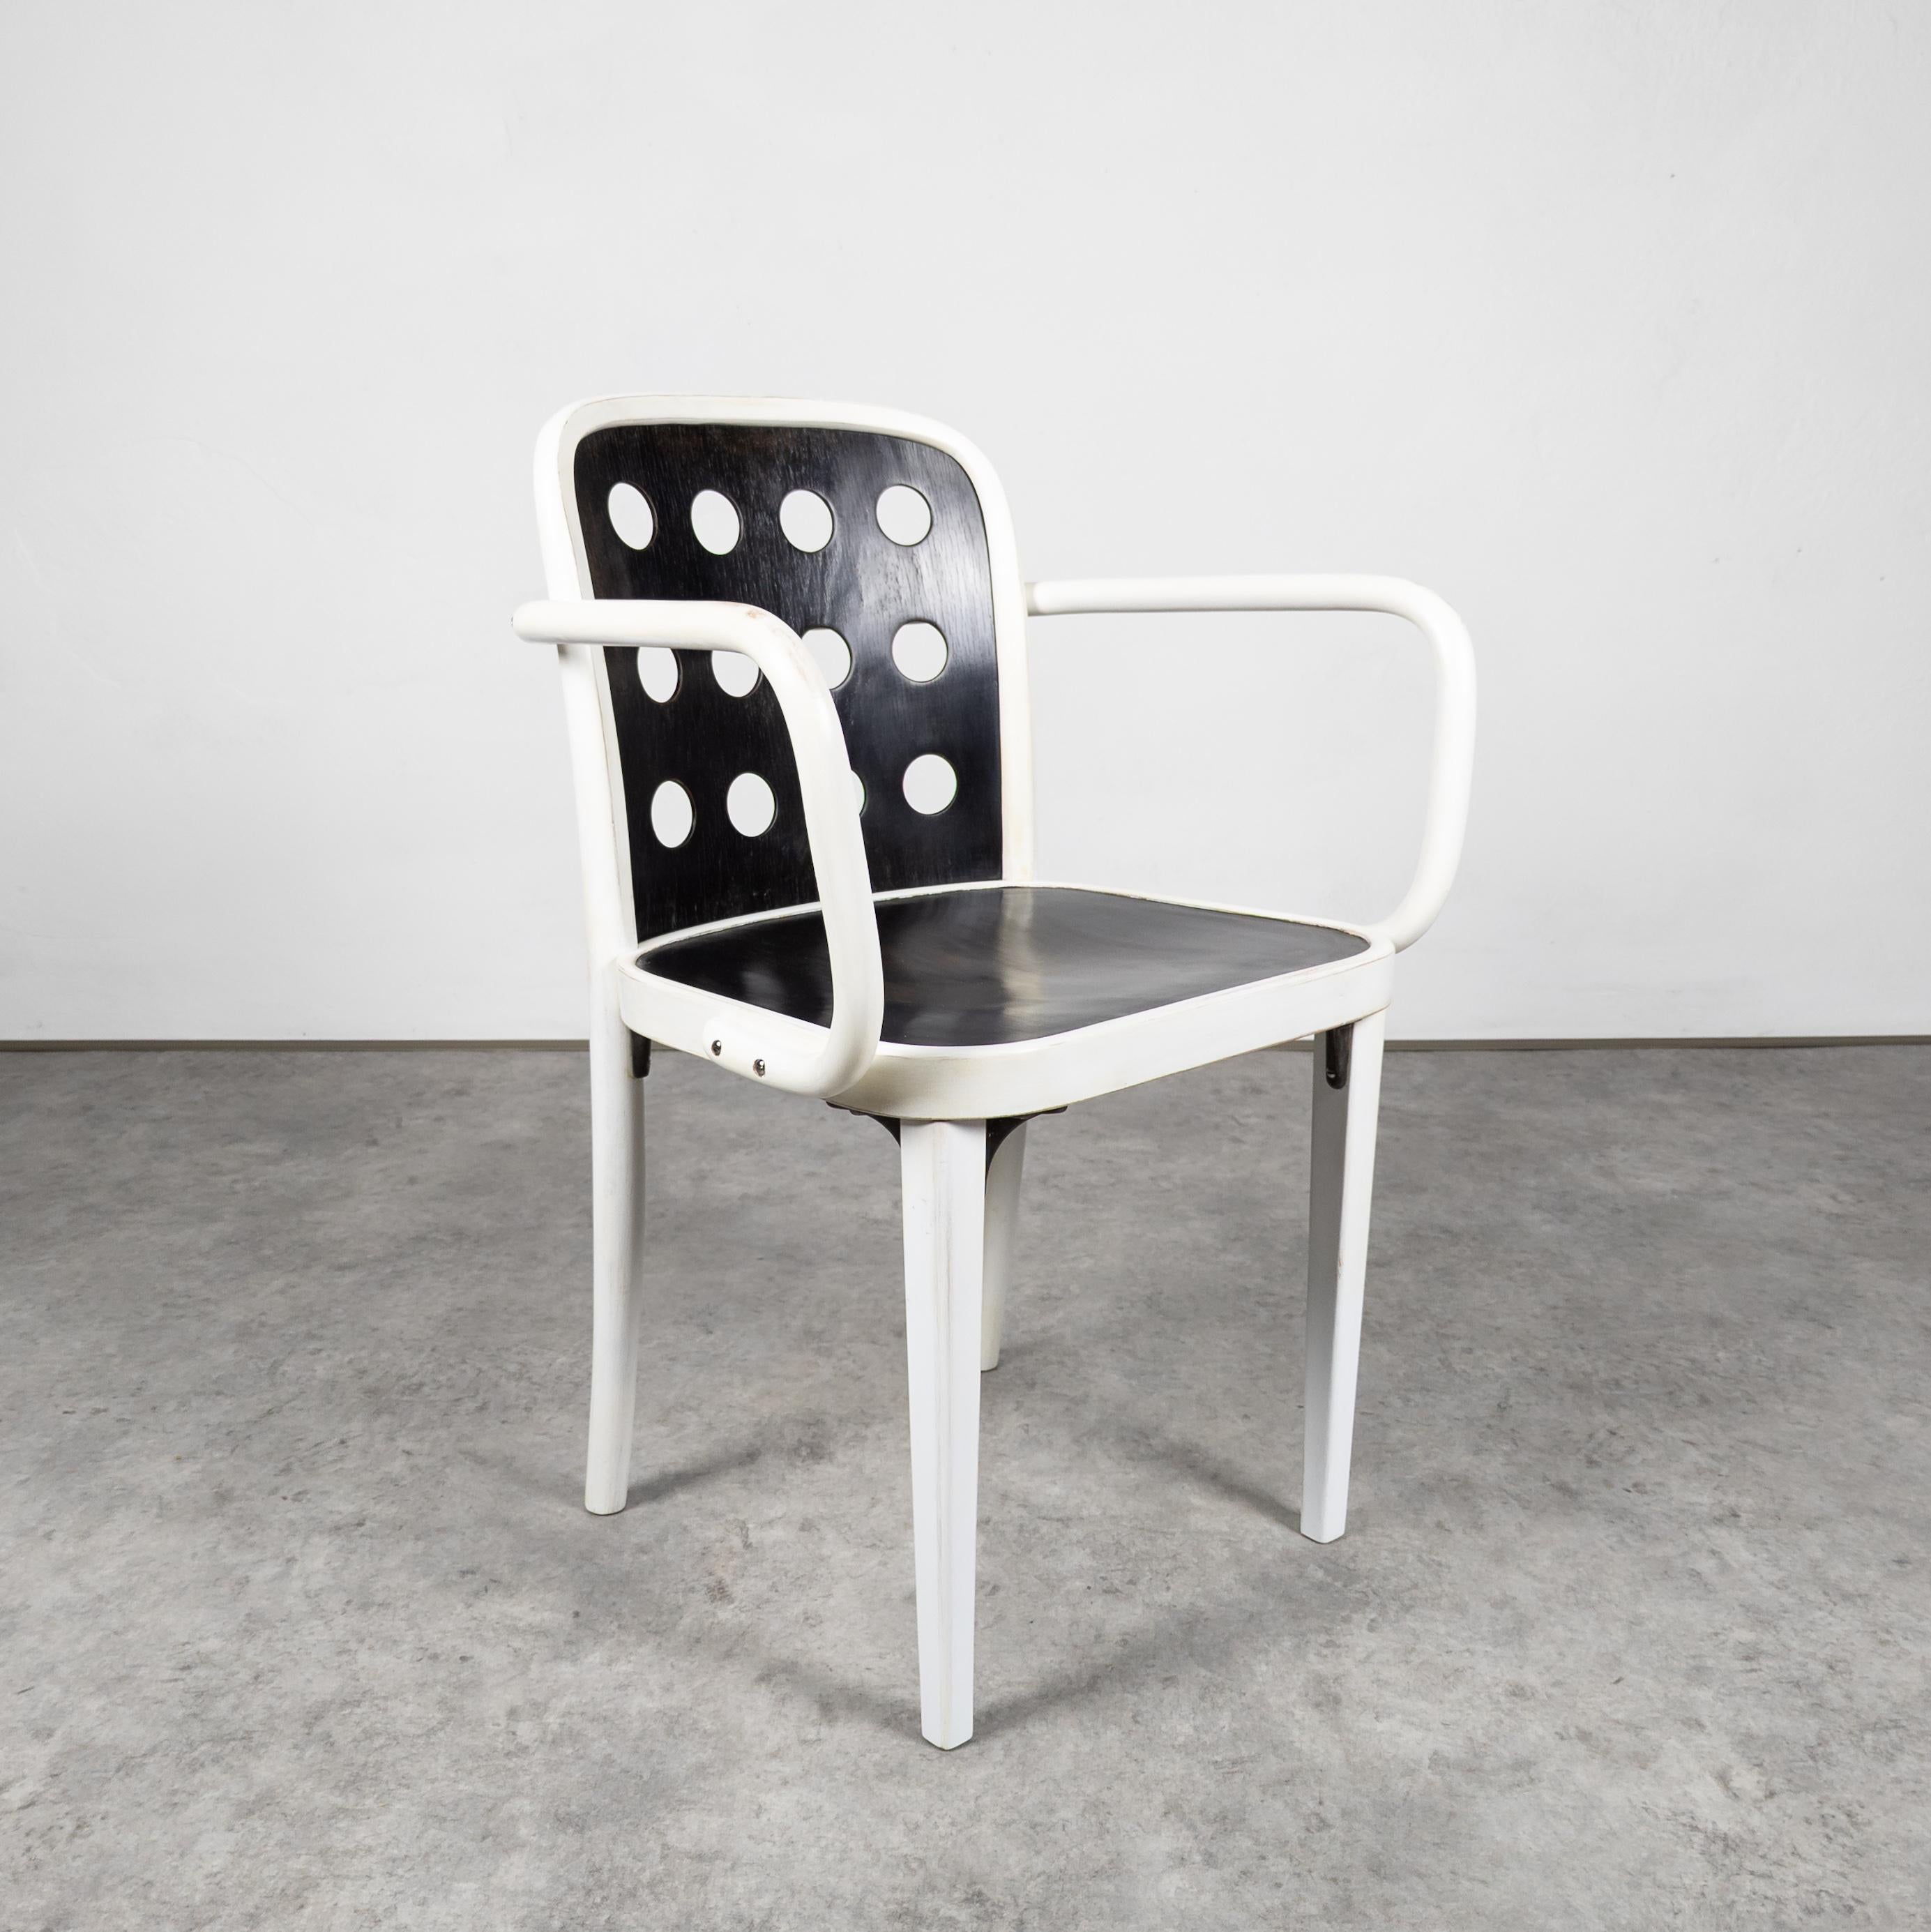 This extremely rare model was jointly designed by Josef Hoffmann and Oswald Haerdtl for the 1930 Werkbund Exhibition in Vienna. Manufactured by Thonet Mundus, 1930s. Bentwood (beech), perforated black and white coated plywood seat and backrest. With